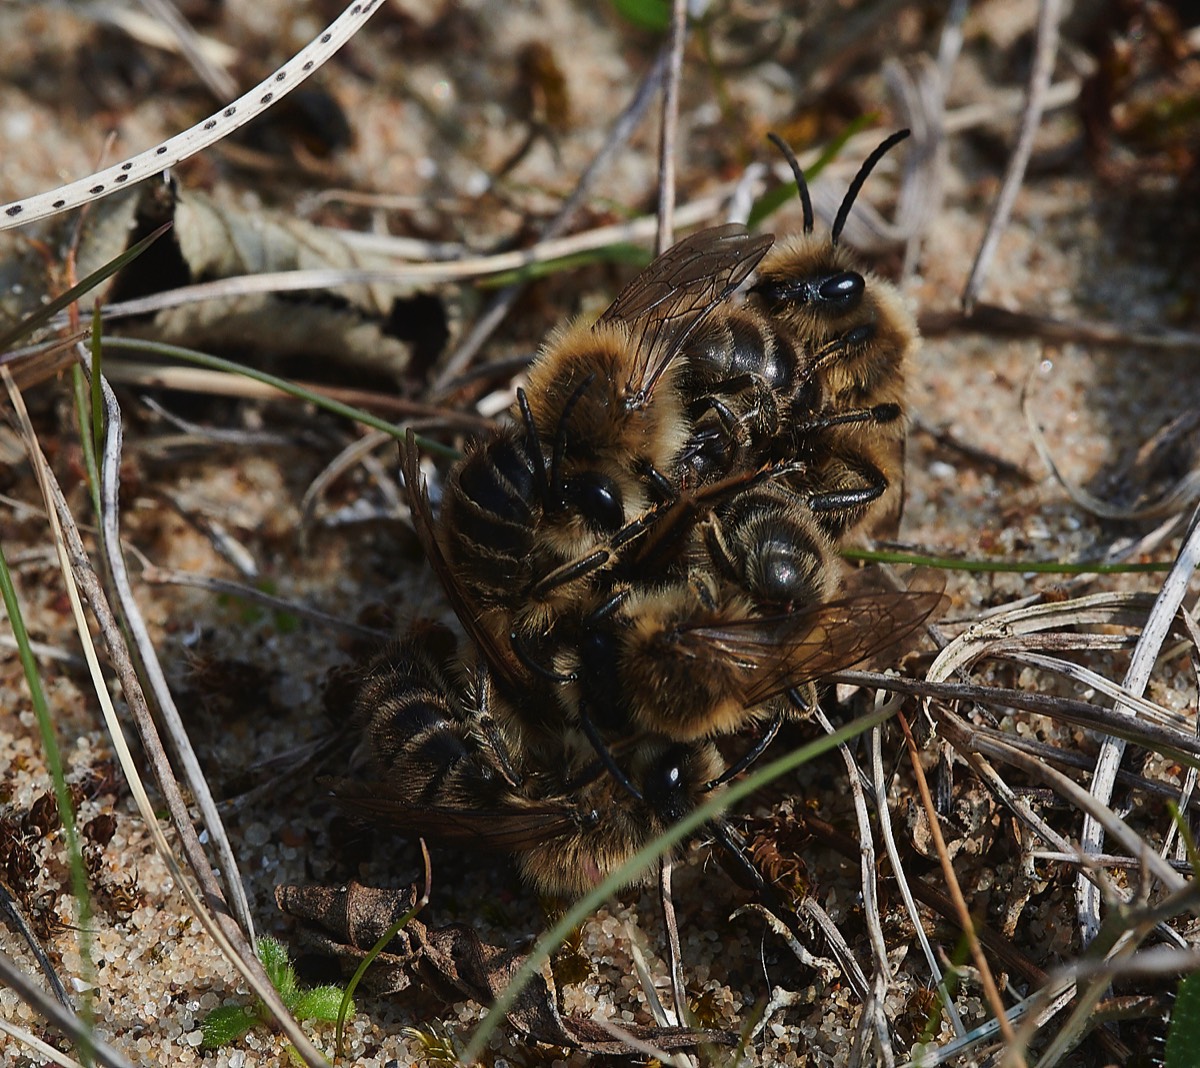 Early Colletes - Holkham Dunes 23/03/22